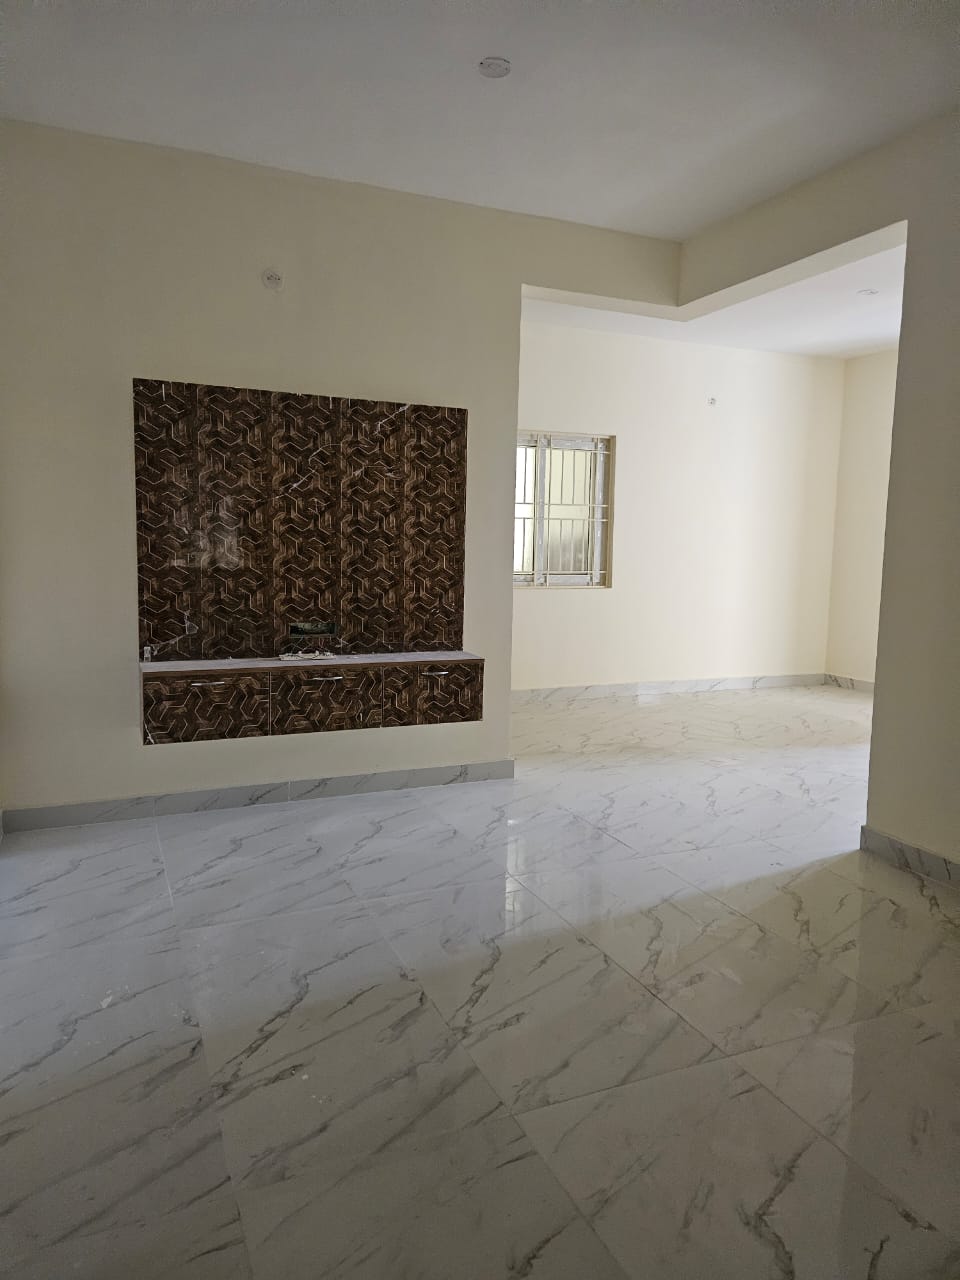 2 BHK Independent House for Lease Only at JAML2 - 5167-20lakh in Kumbalgodu